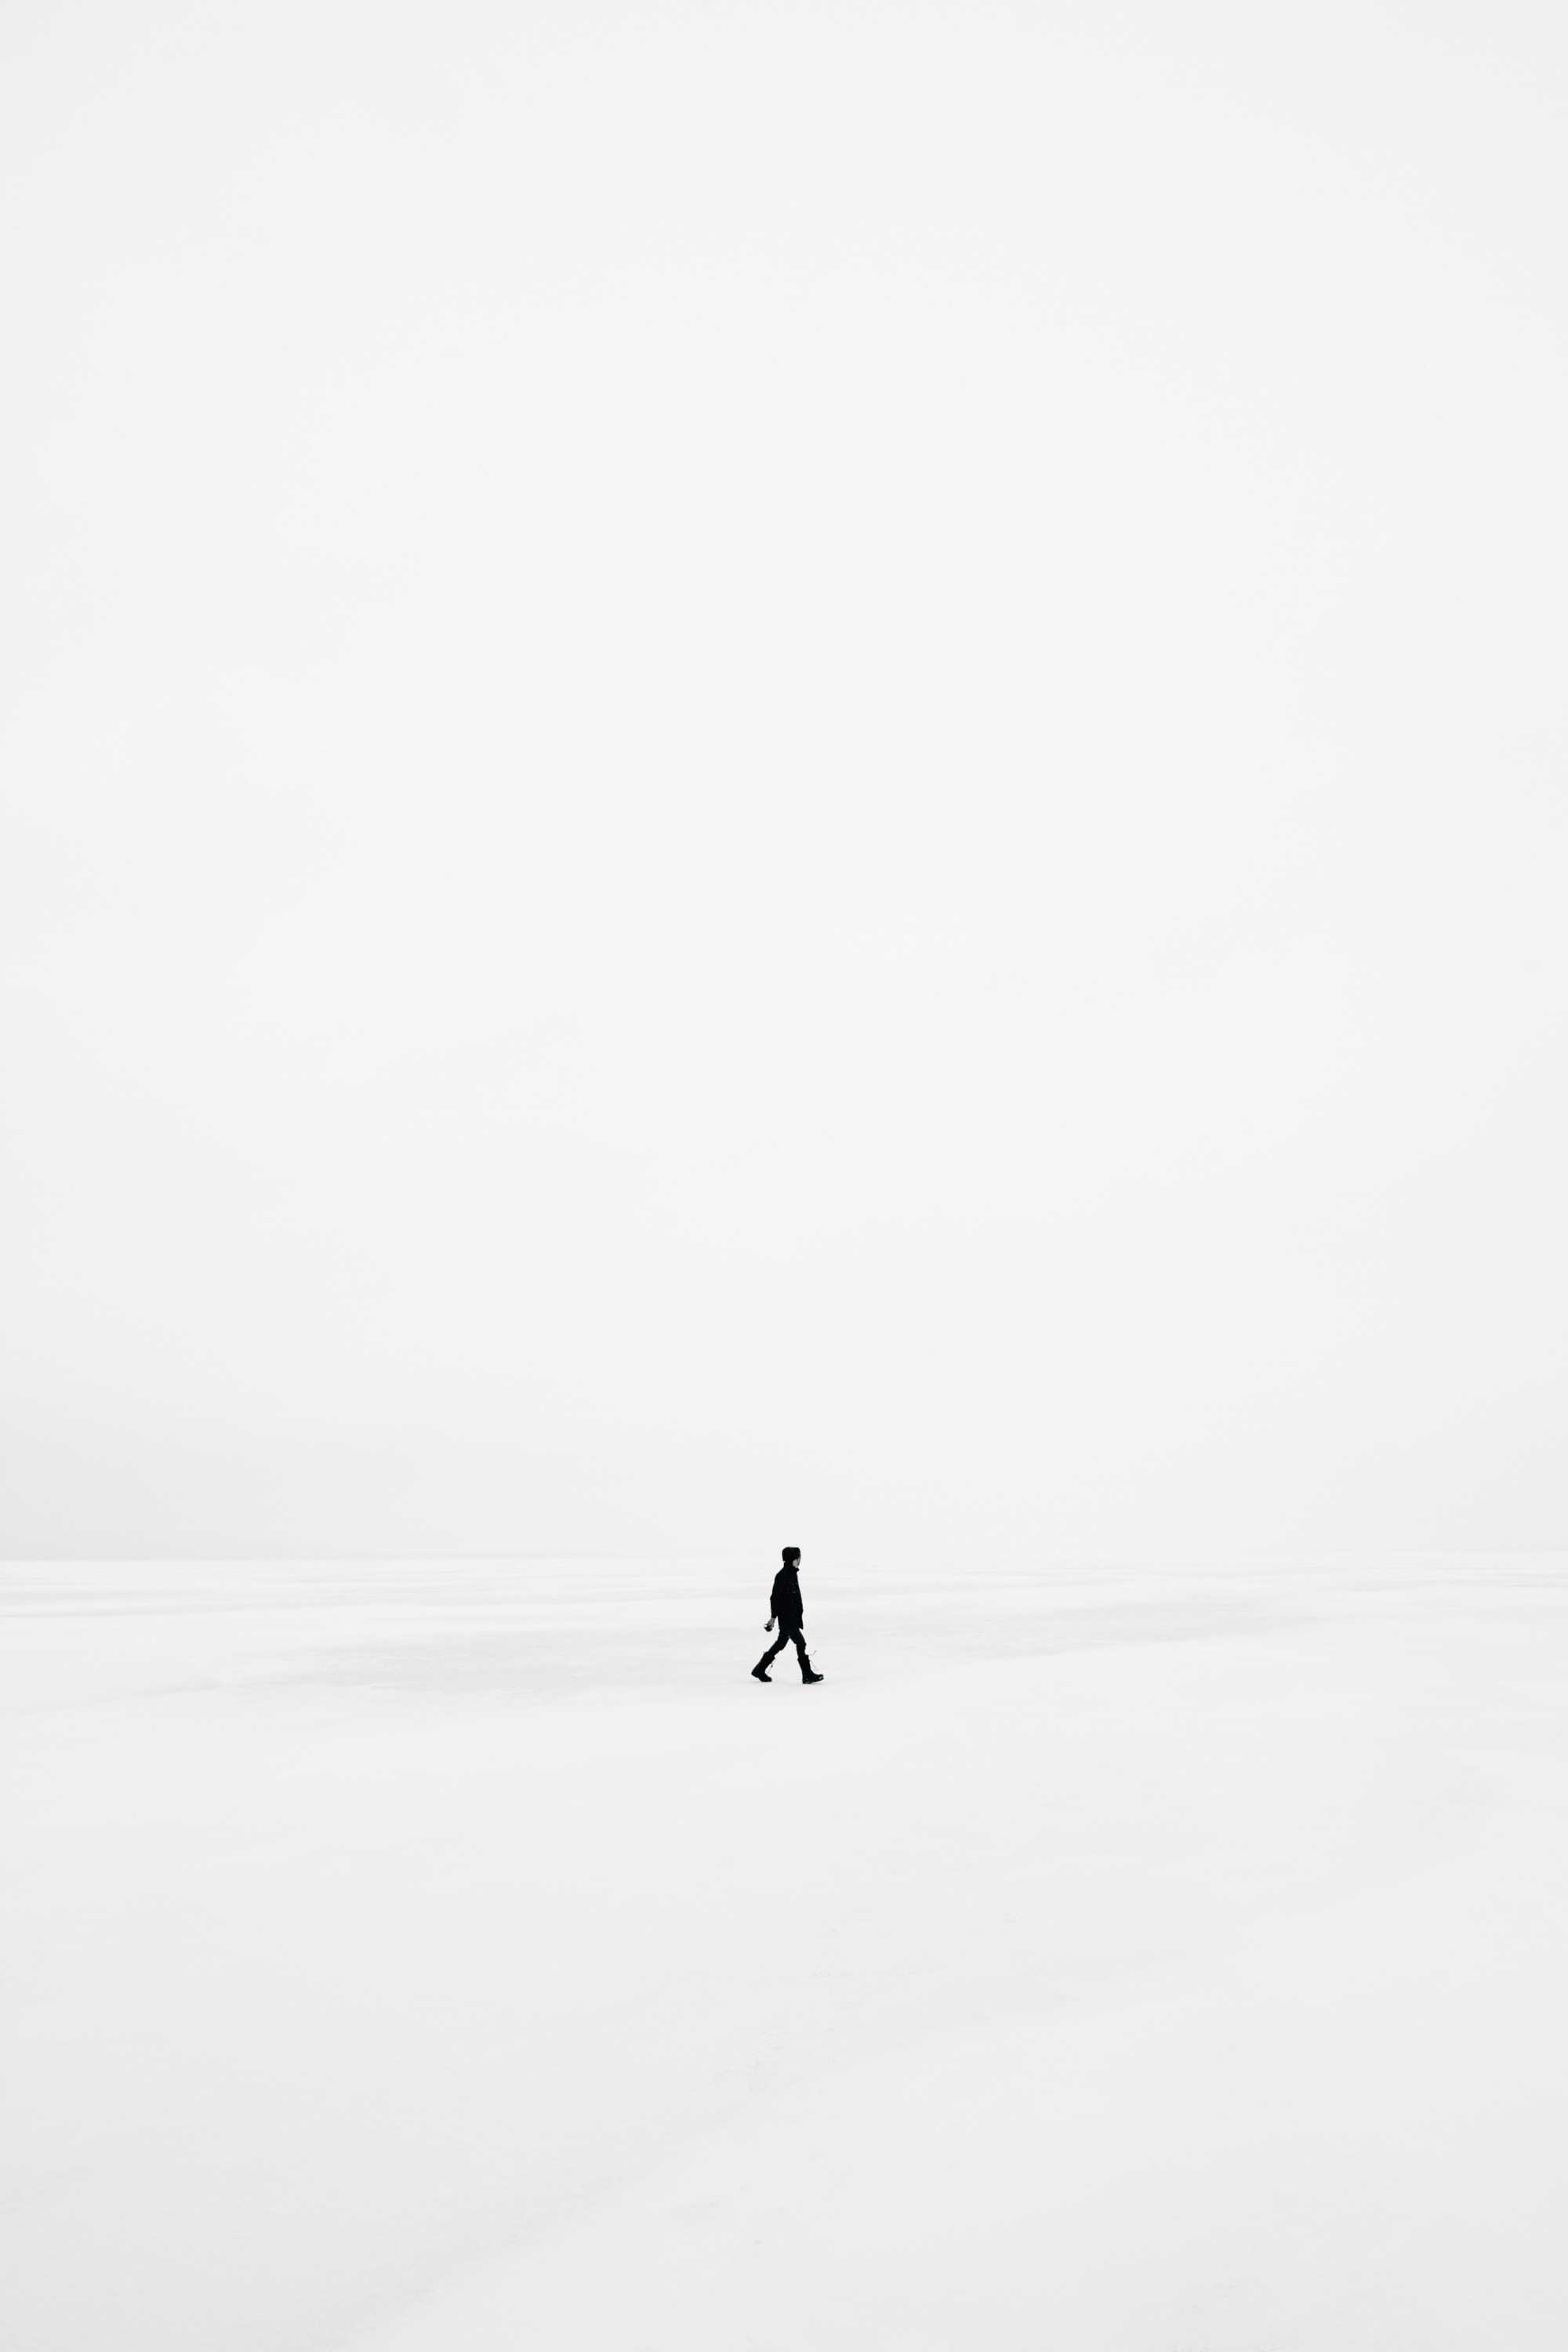 homme-marche-neige